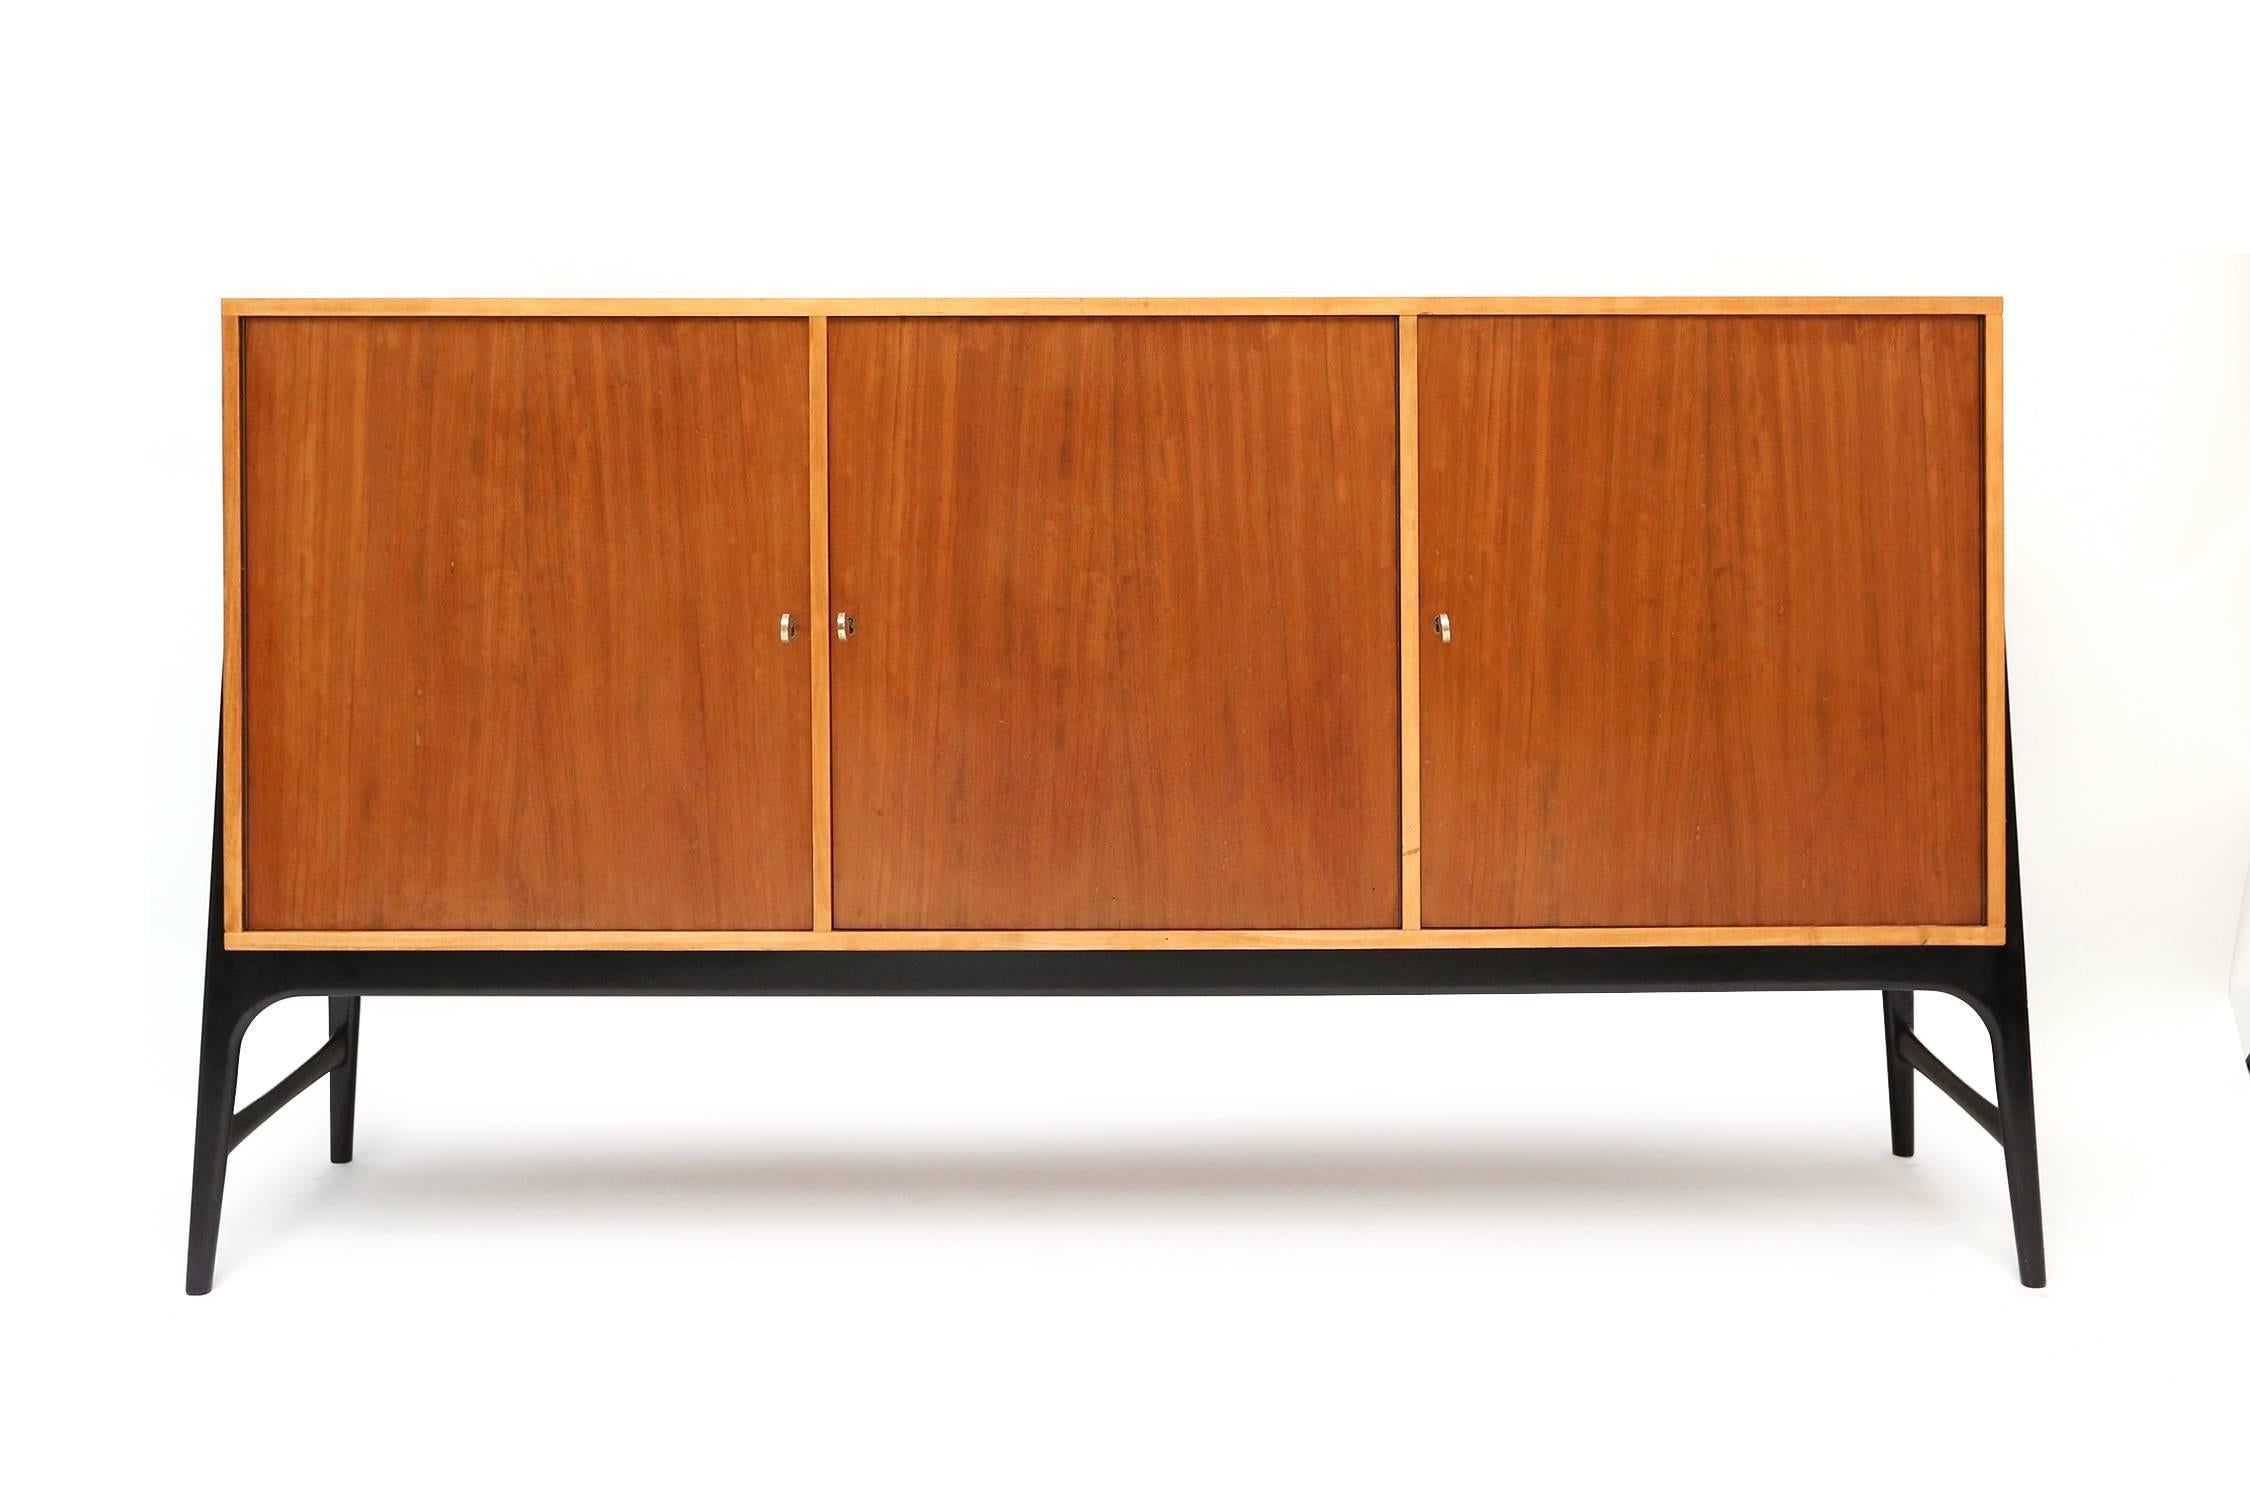 Great 1950s credenza by Alfred Hendrickx, Belgium.
Teak veneer black lacquer.
Organically shaped legs.
Brass keys are all there.
Measures: L: 180 cm, H: 100 cm, D 45 cm.
                       